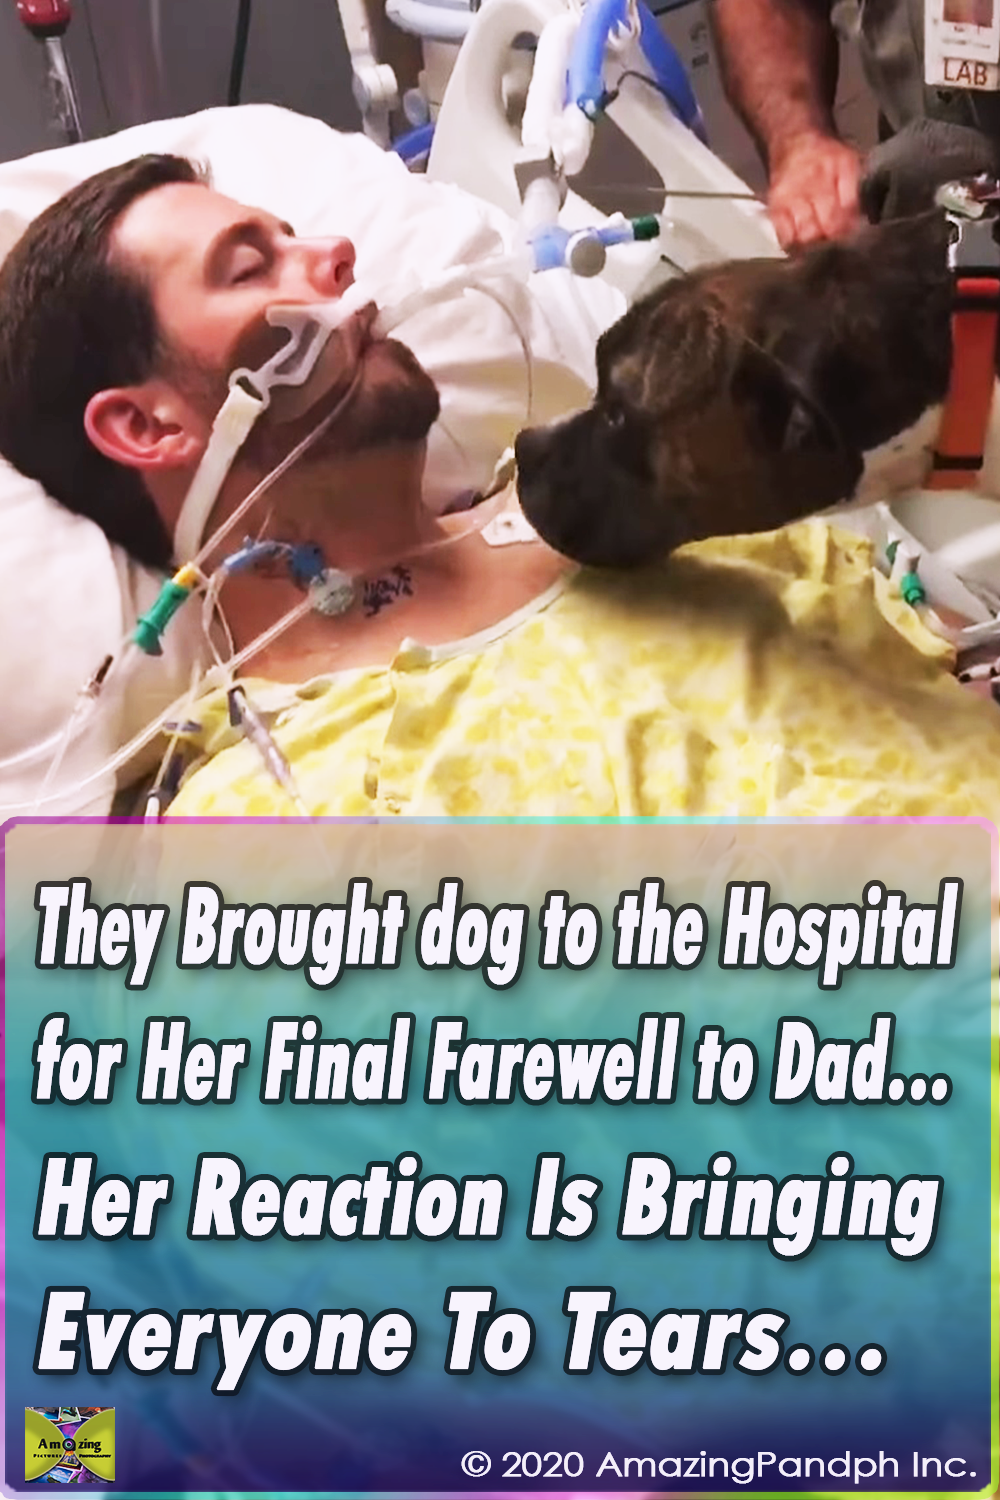 viral,video,incredible,interview,accident,veteran,dog,pets,animals,touching,attack,animal attack,dog attack,touching video,touchingstorie,viral video,viral stuff,viral storie,best sories,most viewed stories,stories for dogs,stories for pets,hospital